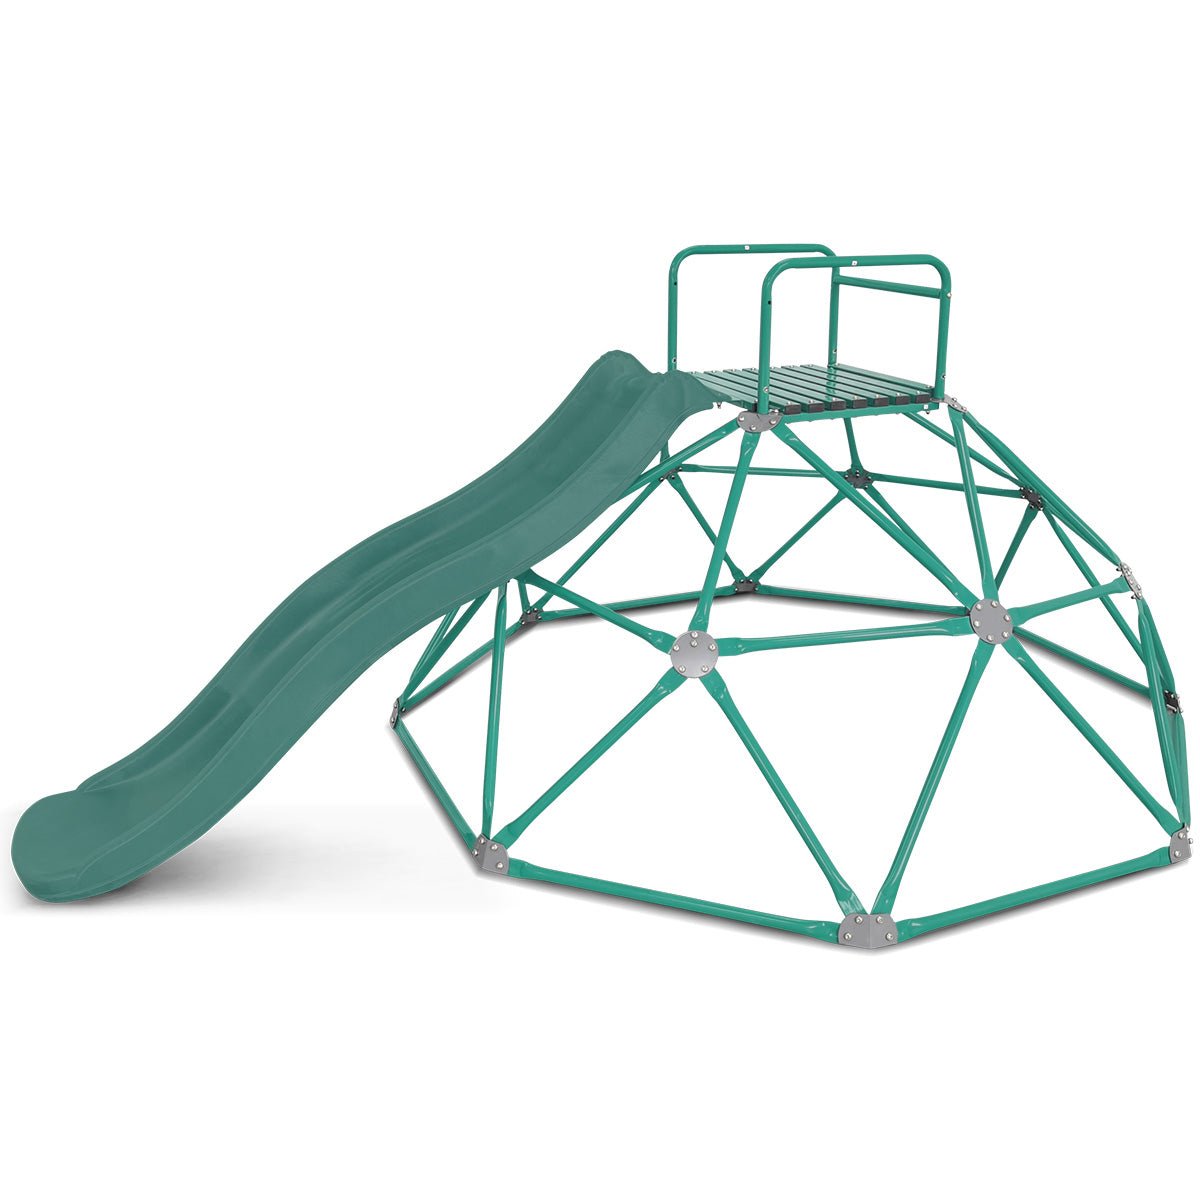 Shop Lifespan Kids Summit Dome Climber with 1.8m Slide: Outdoor Fun